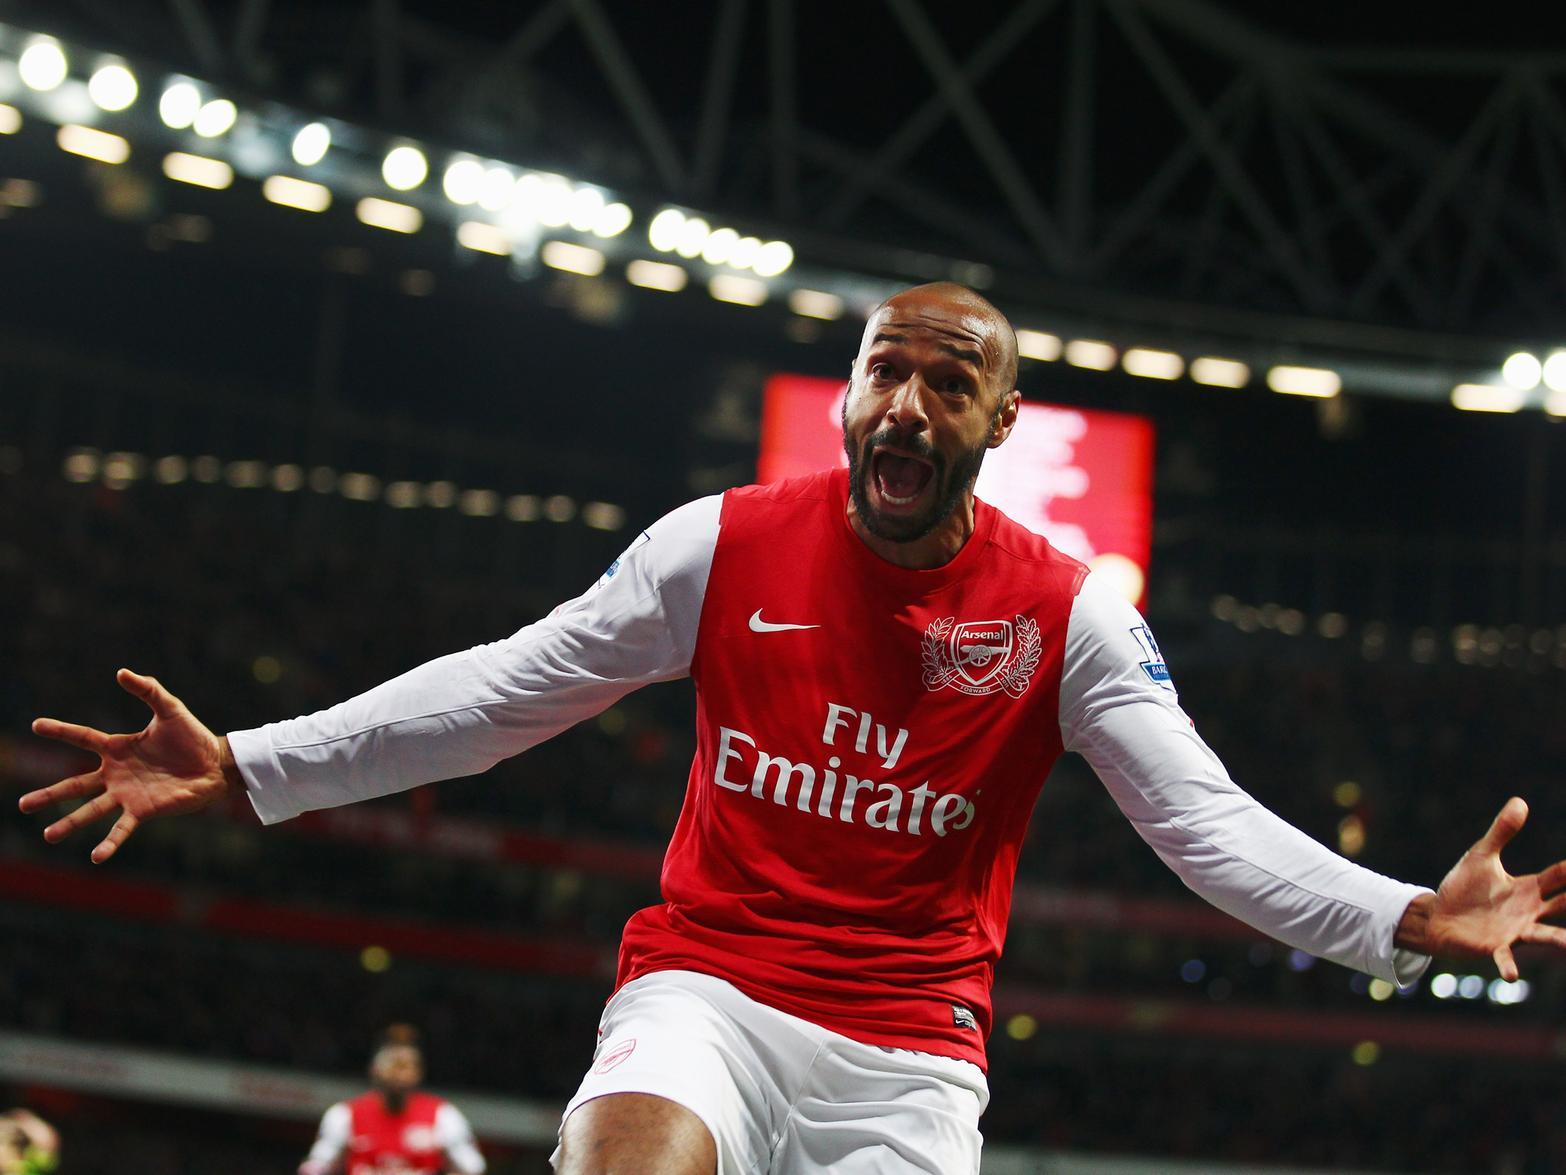 The Whites competed well against Premier League Arsenal before a fairytale goal by the returning Gunners legend Thierry Henry broke Leeds hearts.